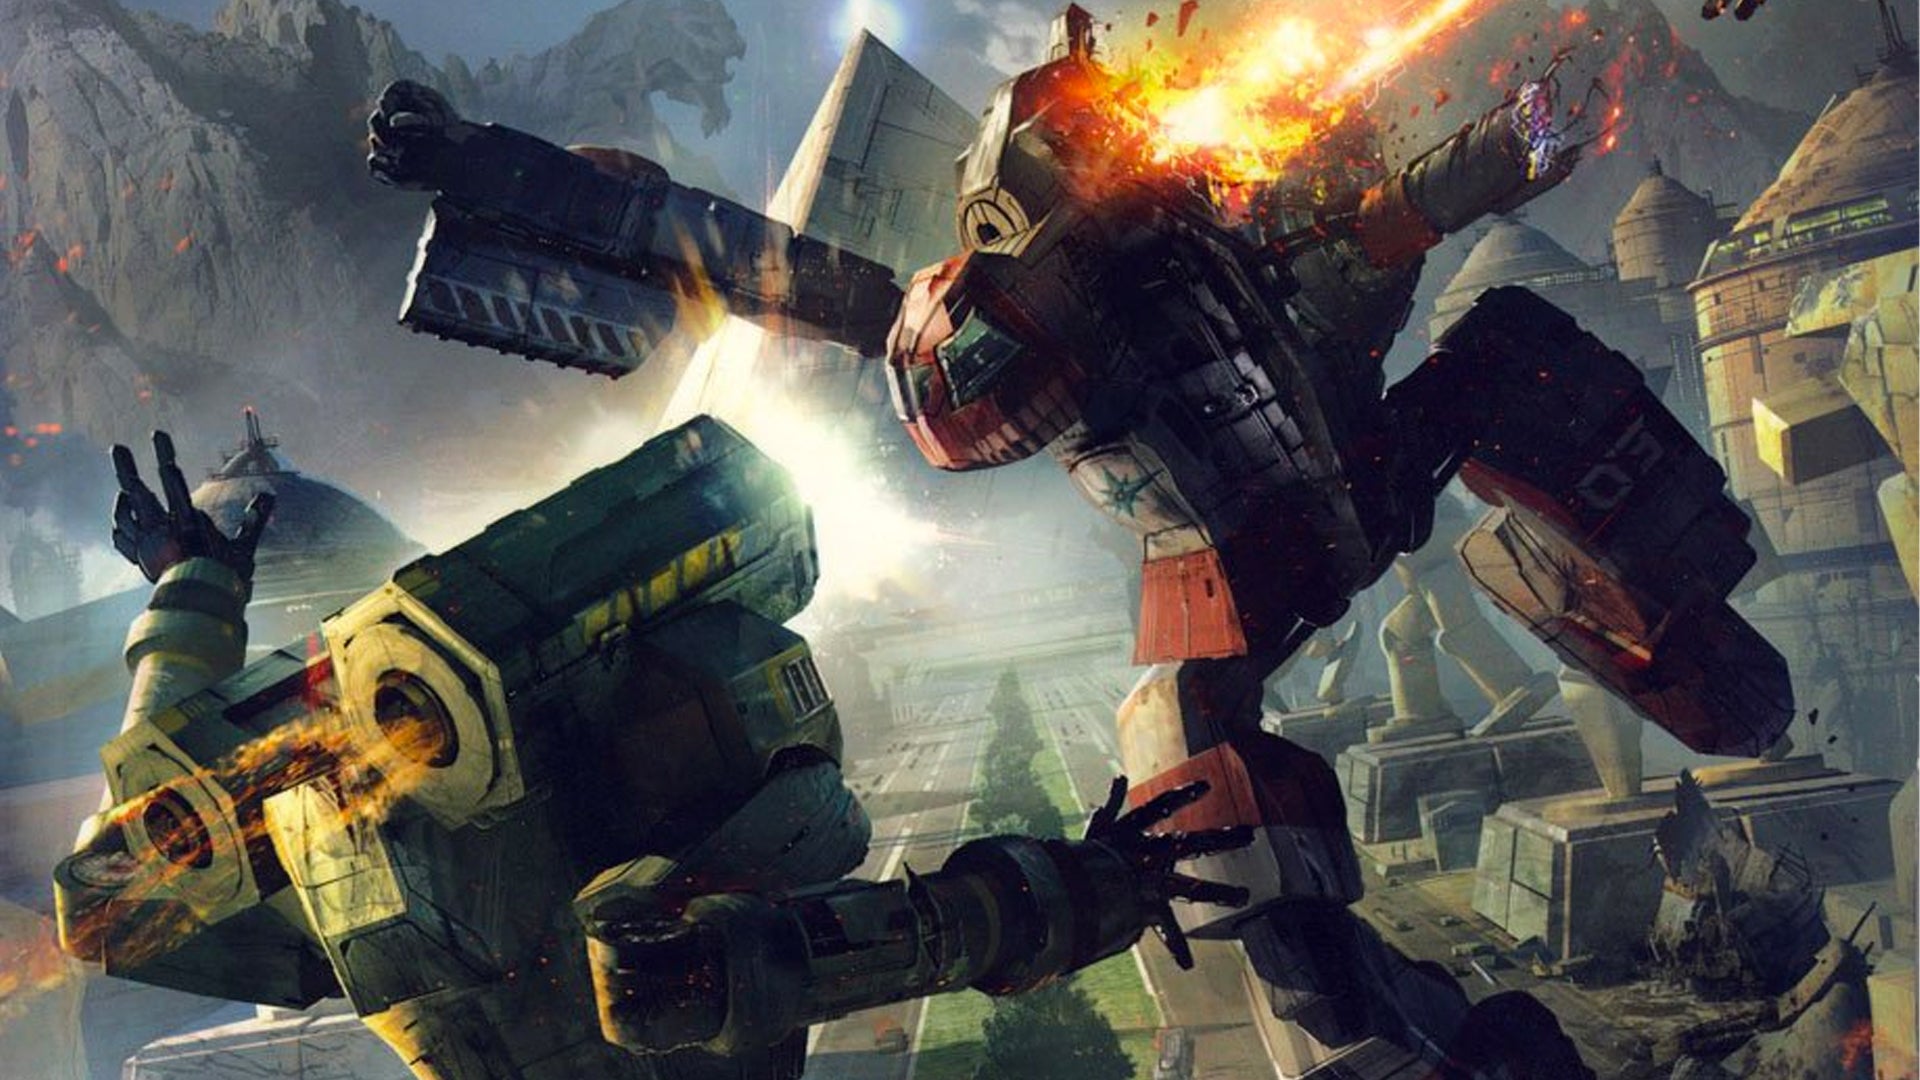 Image for BattleTech: A Time of War bundle includes everything you need to play the MechWarrior RPG for $13